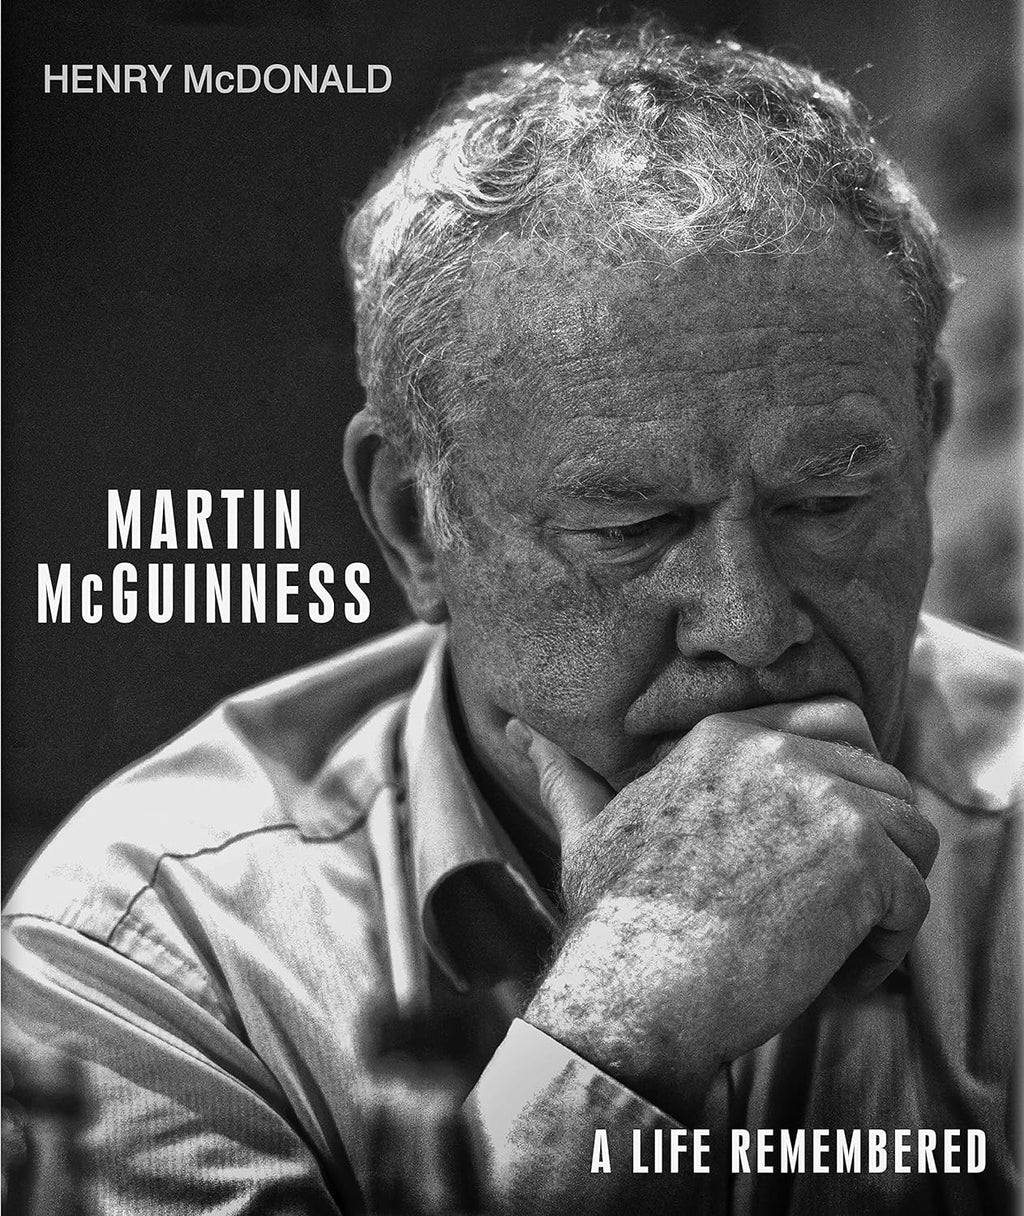 Martin McGuinness: A Life Remembered, by Henry McDonald